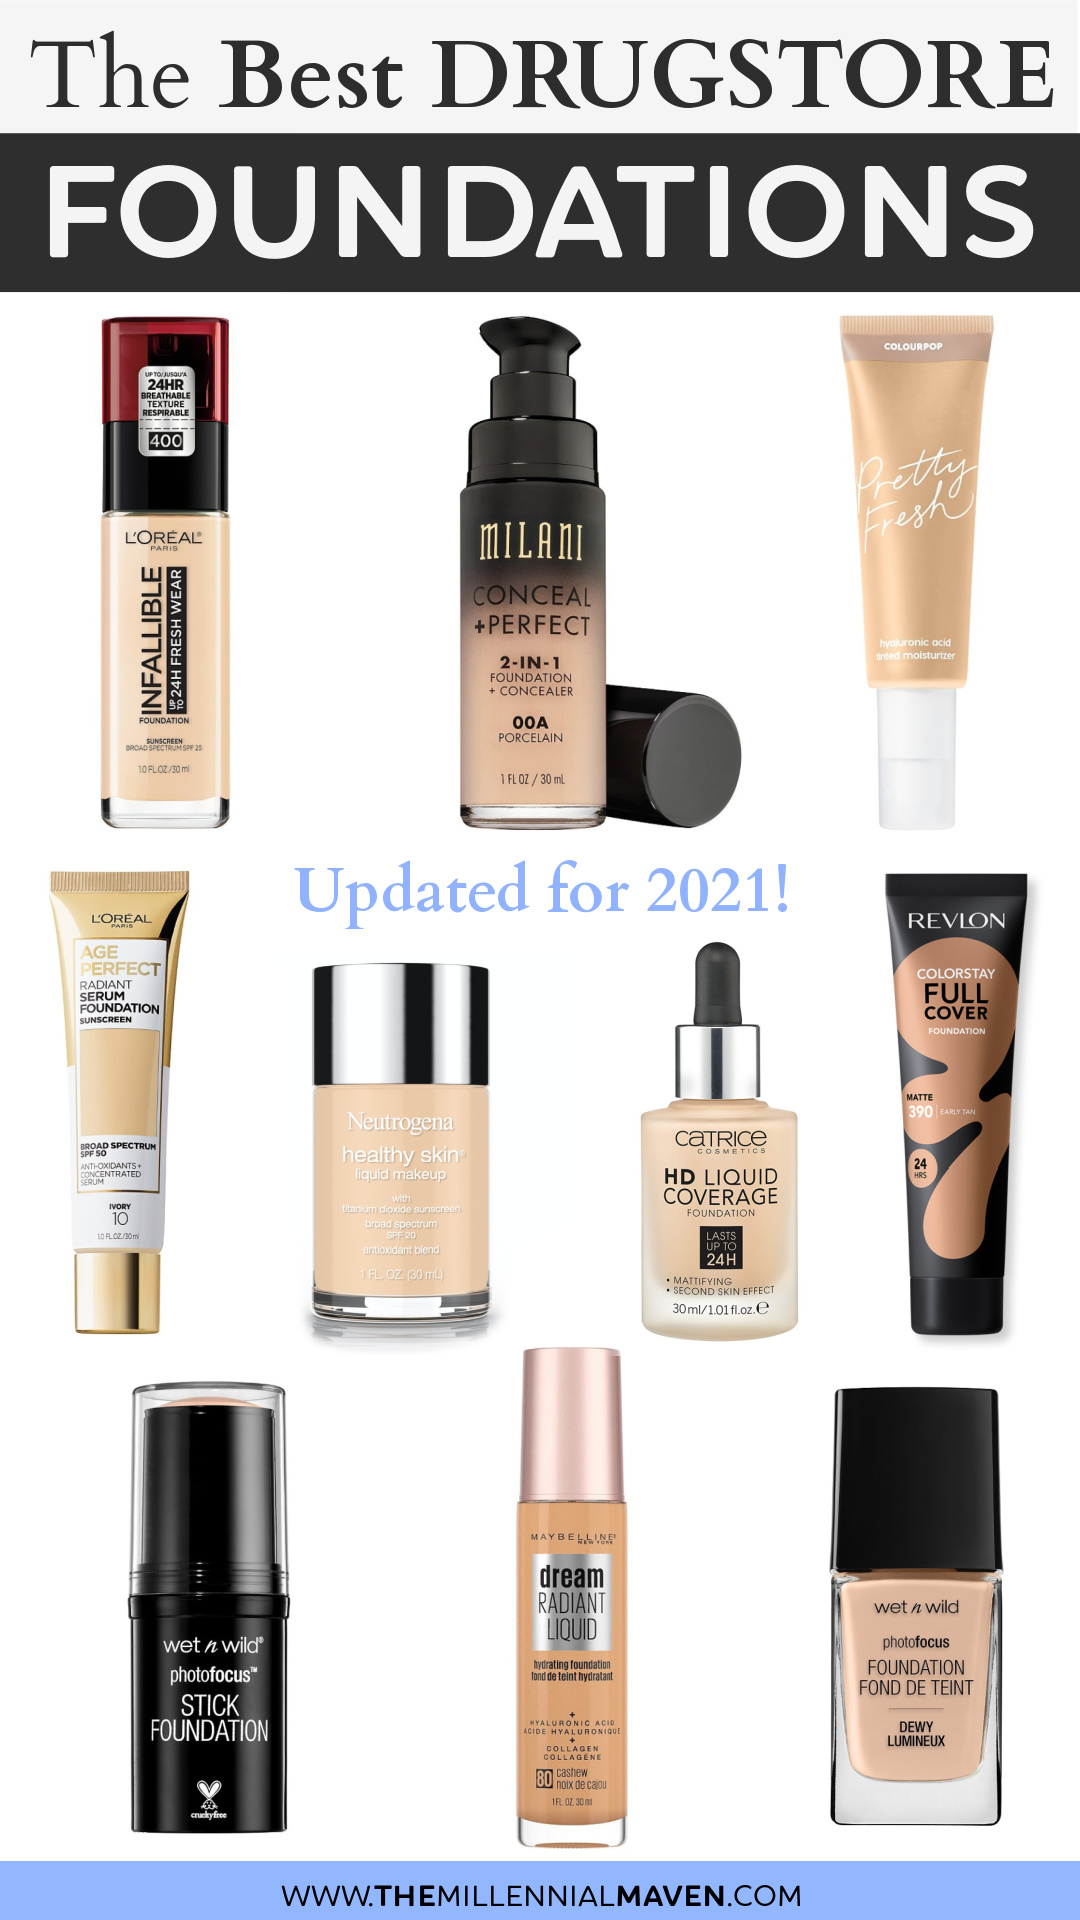 Top 10 Best Foundations at the Drugstore in 2021! | Best Drugstore Foundations